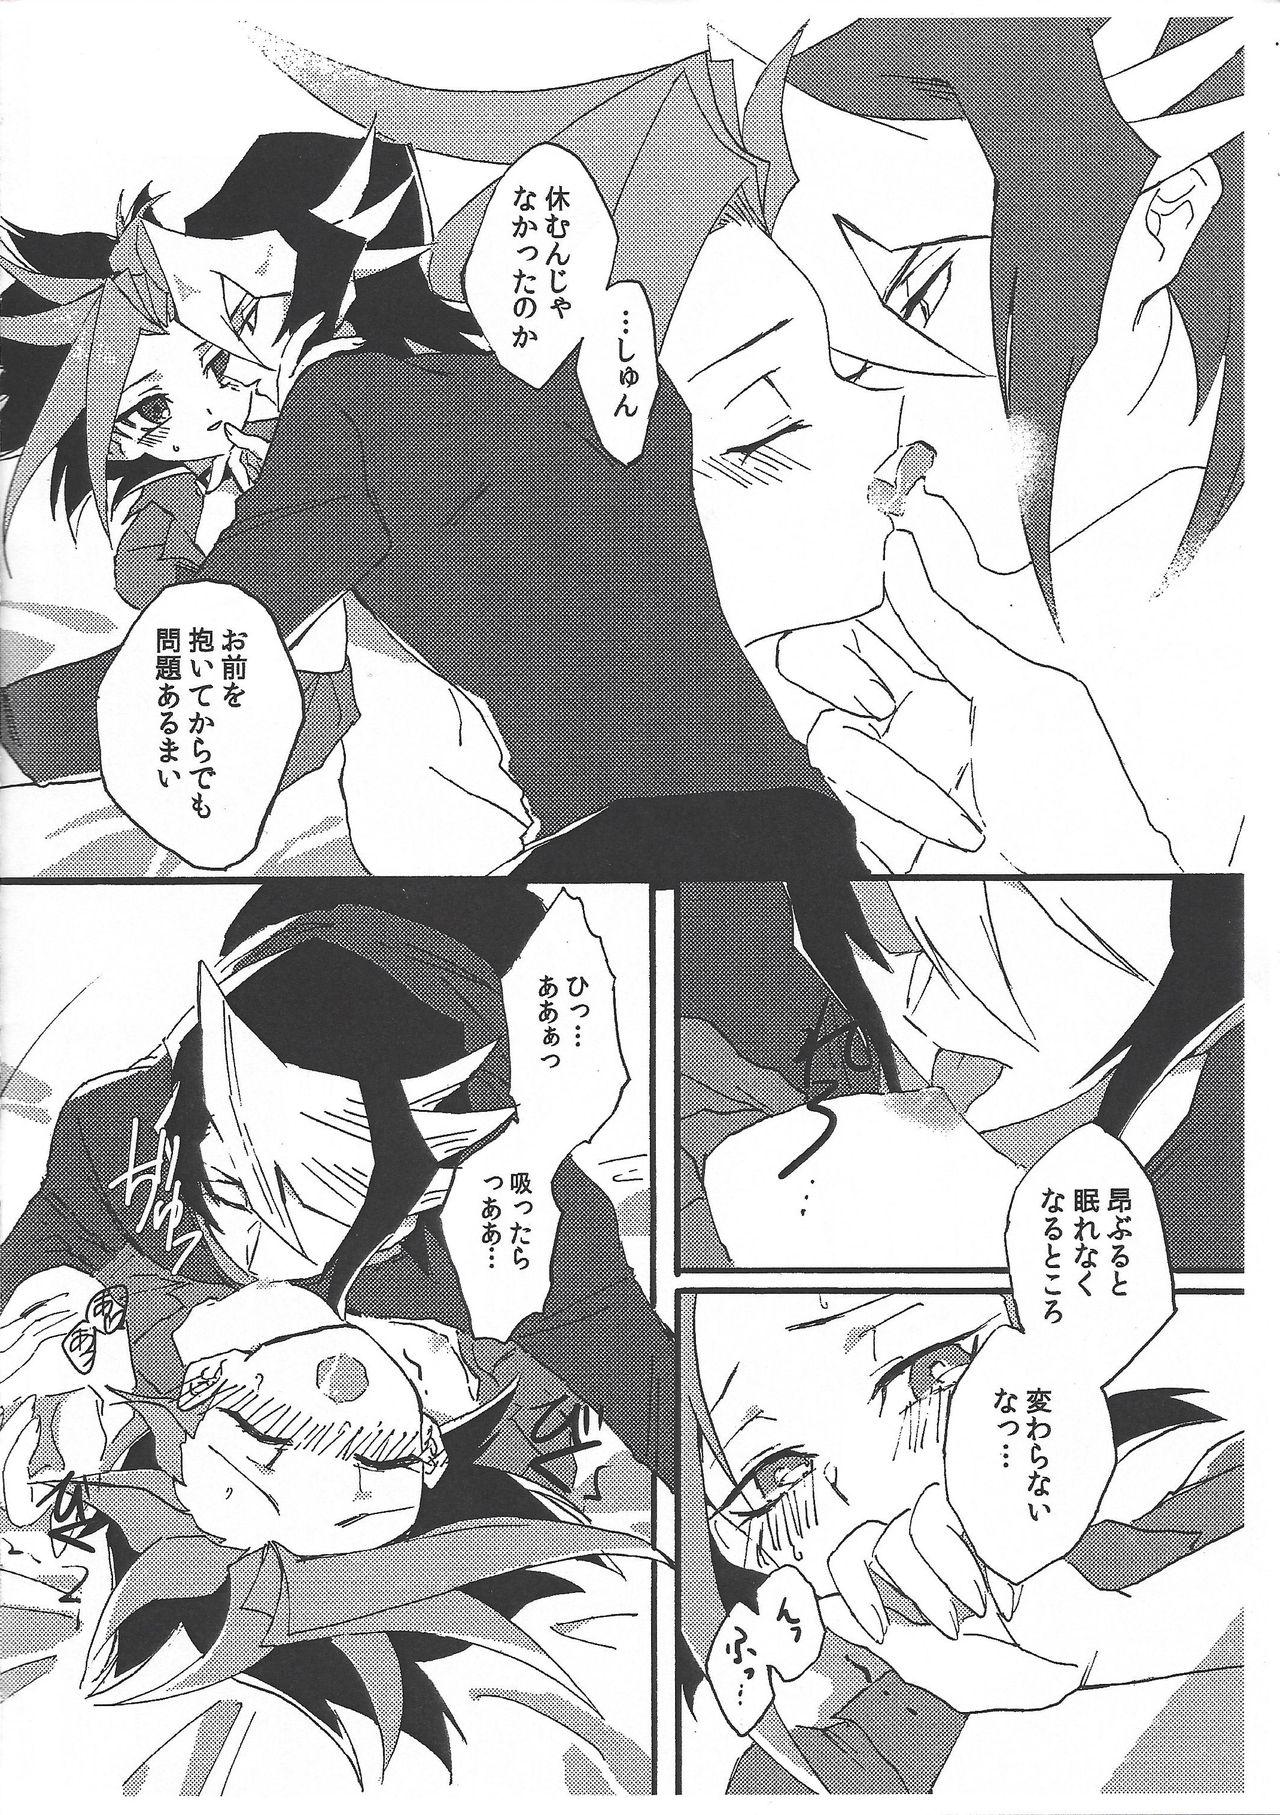 Eat GHOST ROOM - Yu-gi-oh arc-v Lingerie - Page 5